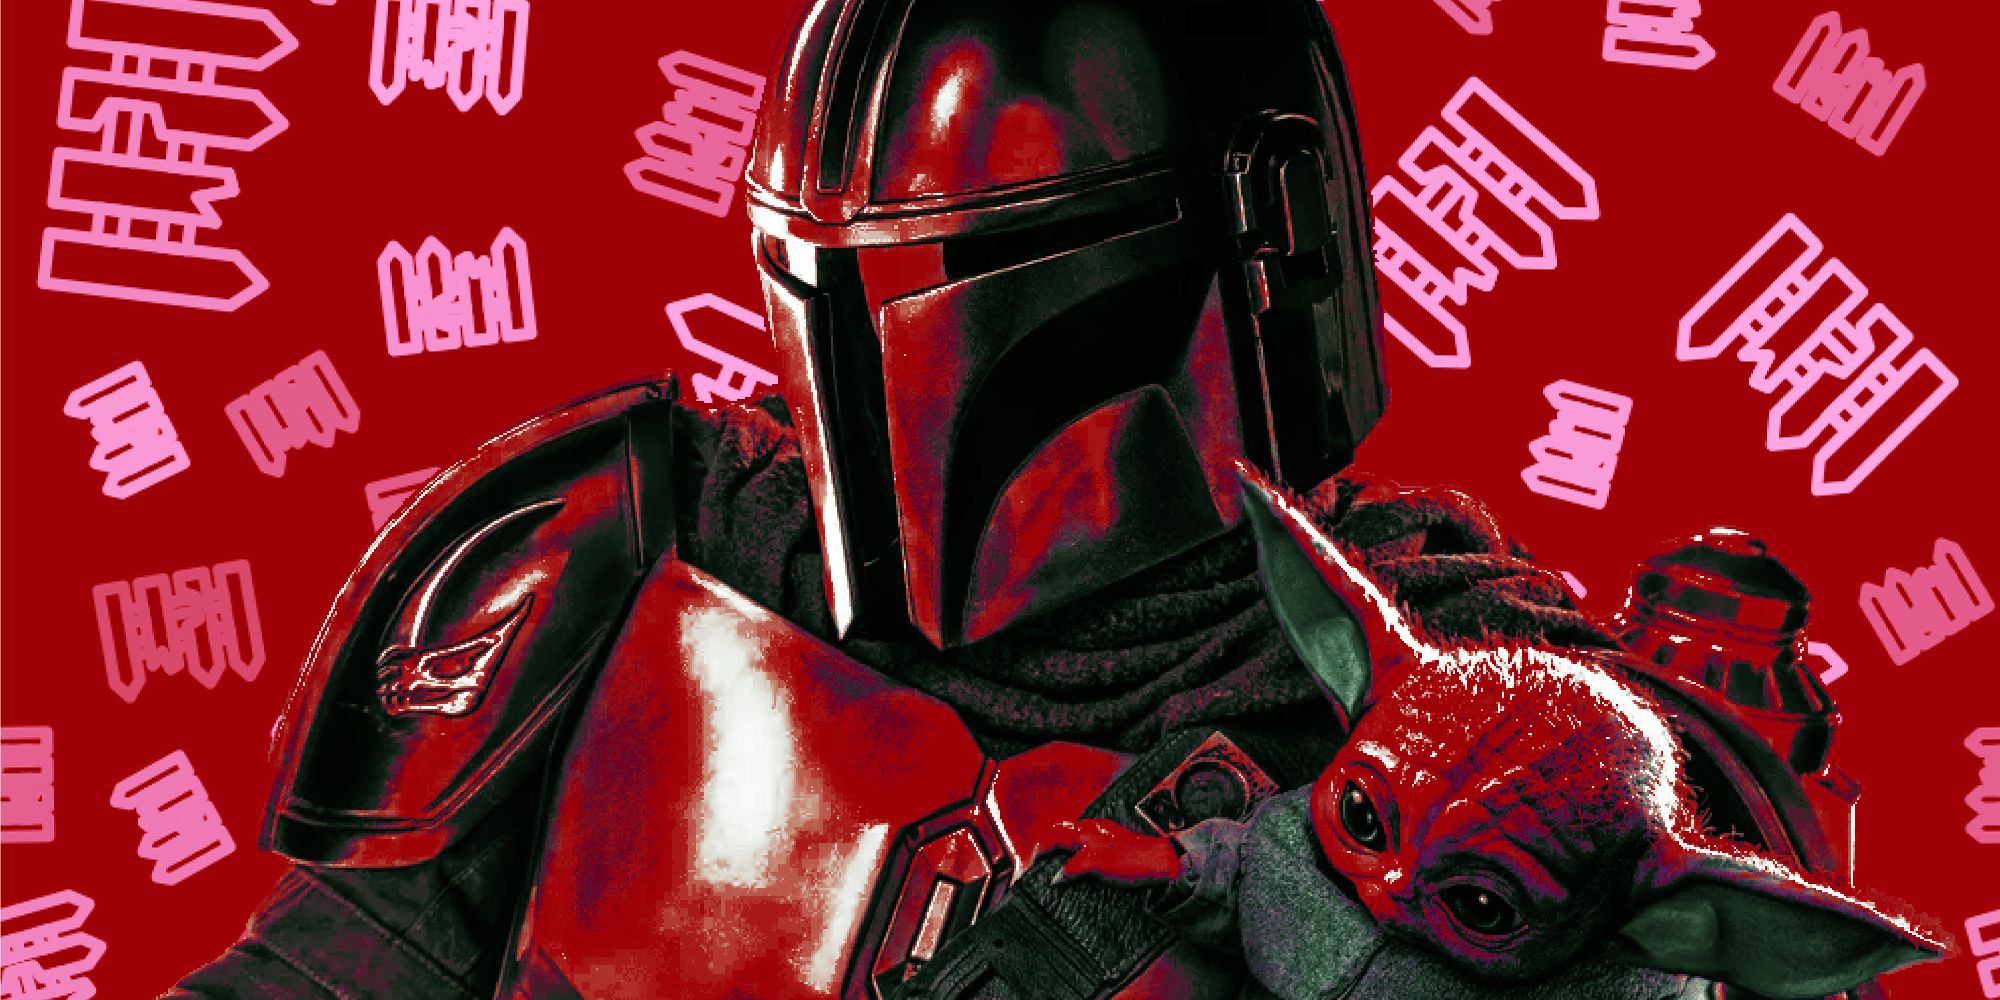 Mandalorian and Grogu in red, over a red background with a pattern of a broken fence